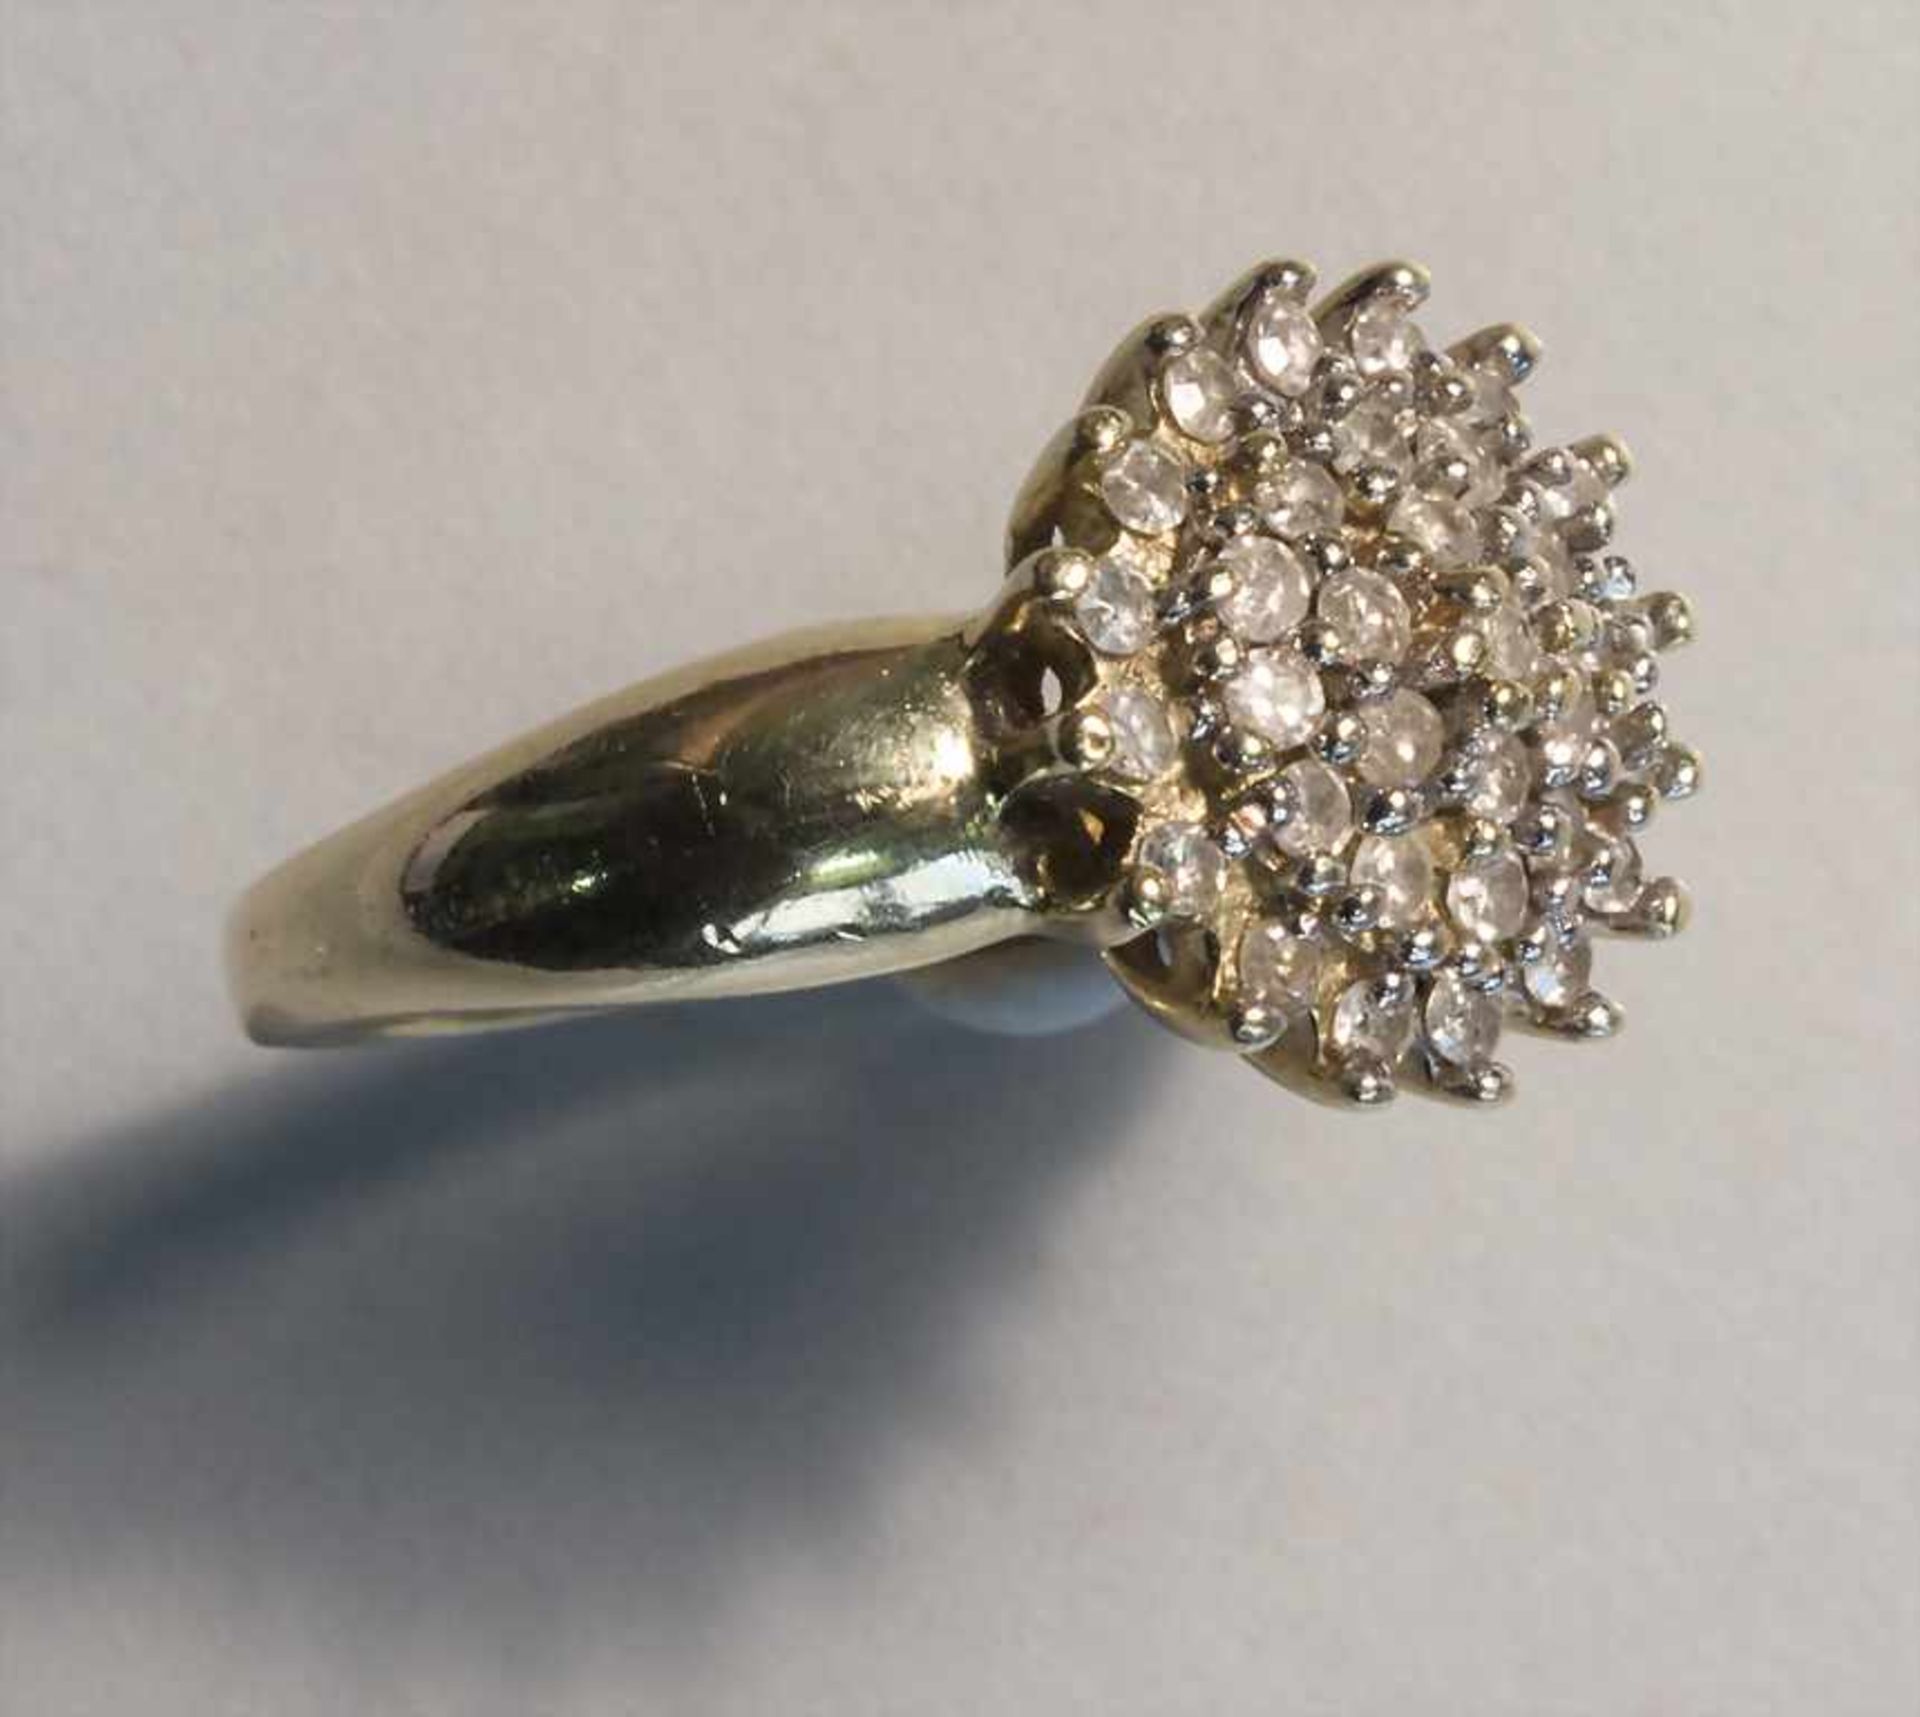 Damenring mit Diamant-Blüte / A ladies ring with a diamond blossom